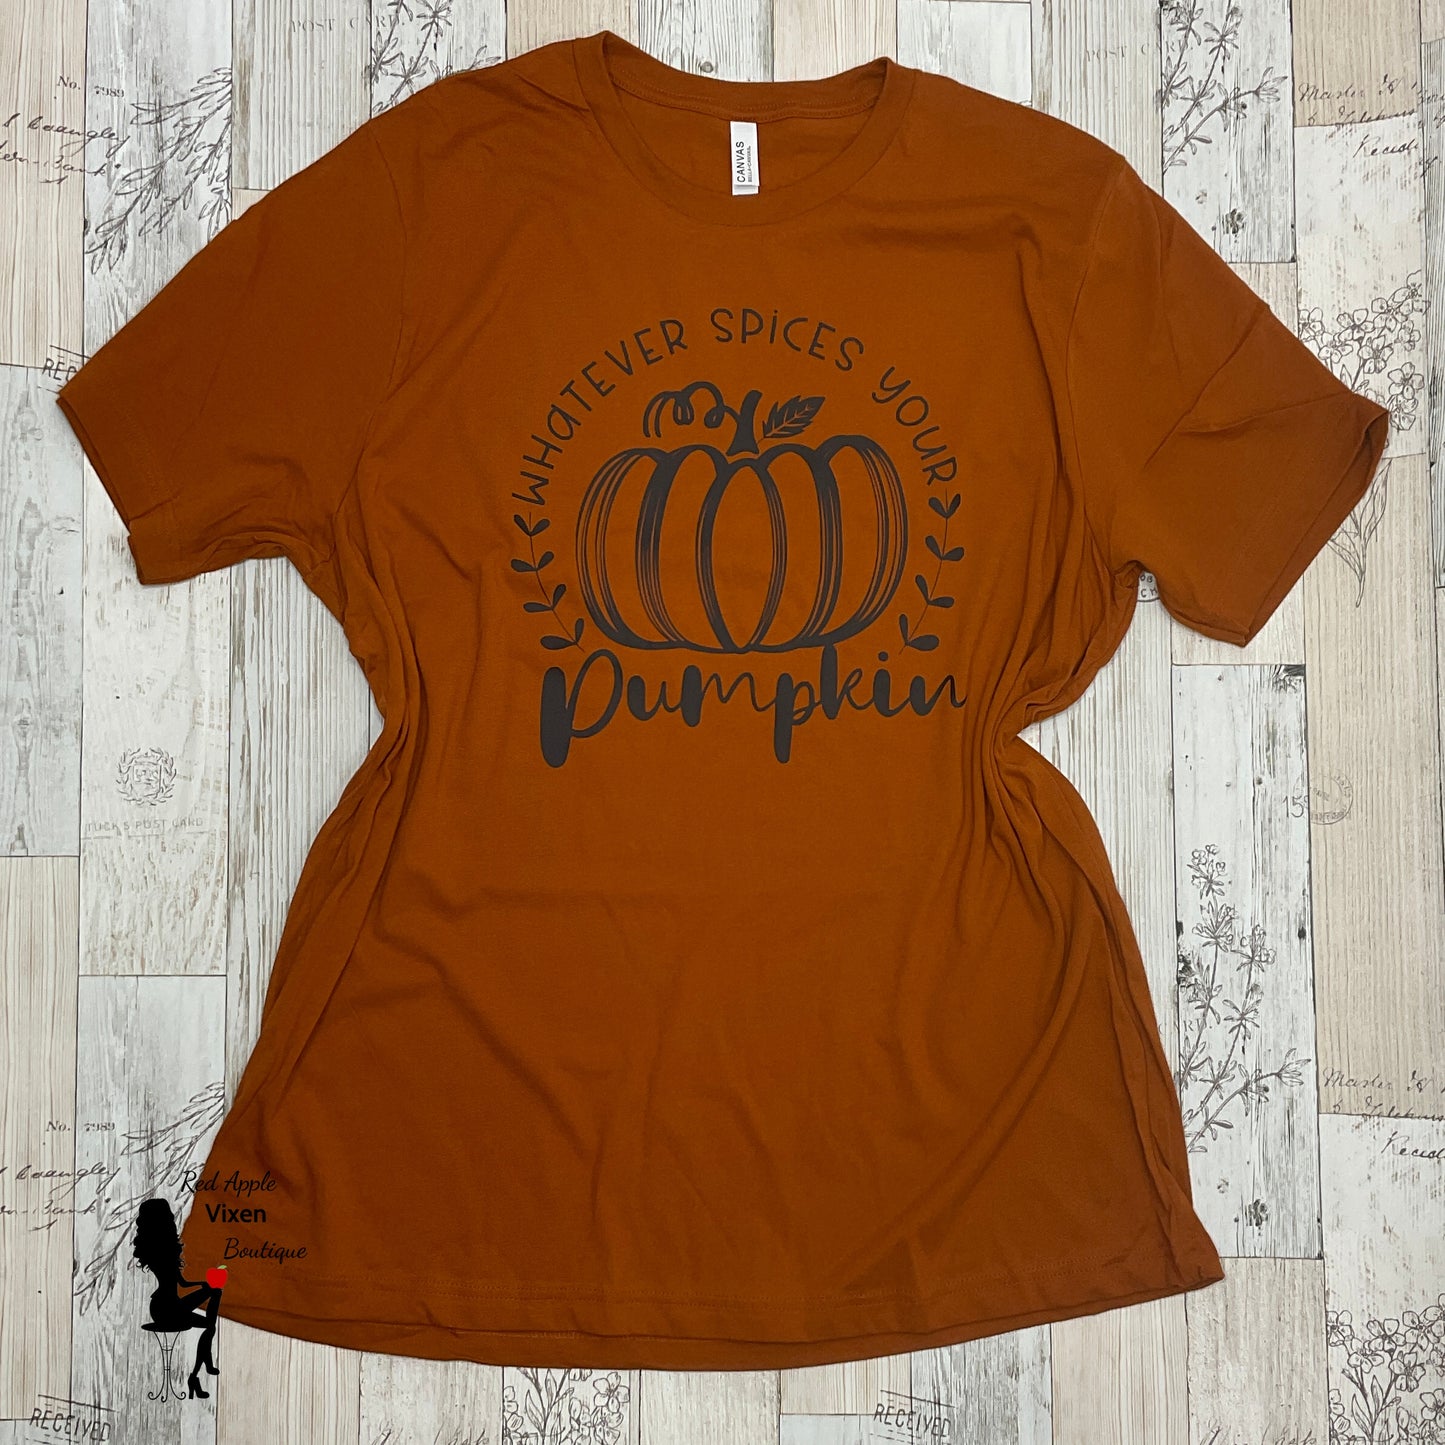 Whatever Spices Your Pumpkin Graphic Tee - Sassy Chick Clothing